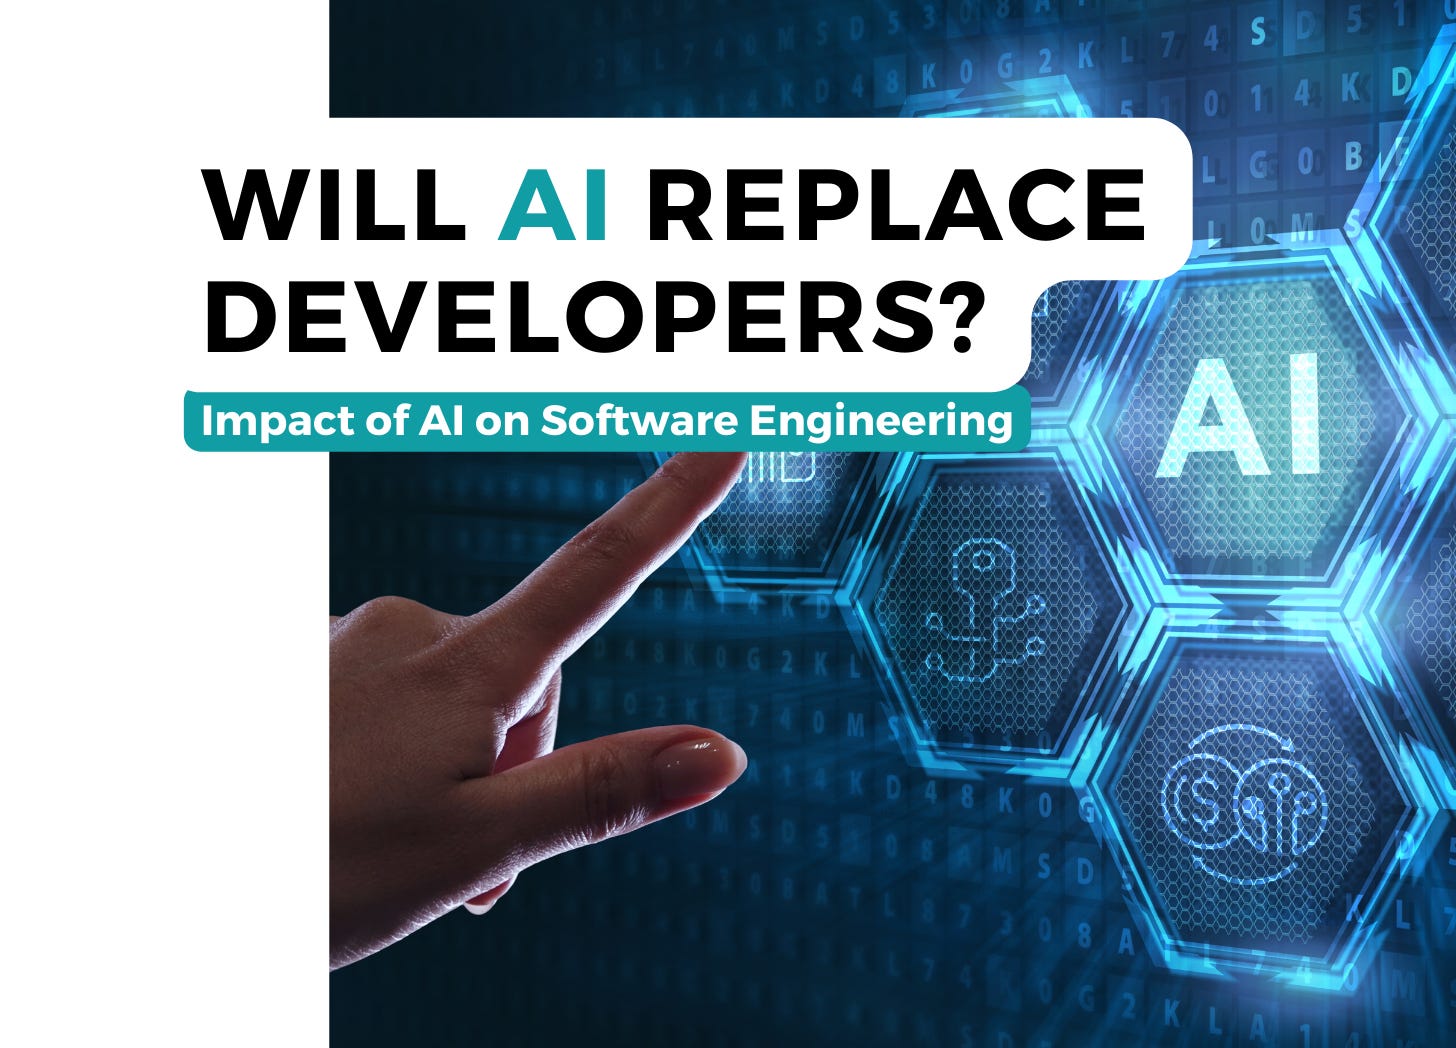 Thumbnail "Will AI Replace Developers". Image Credit Canva Pro